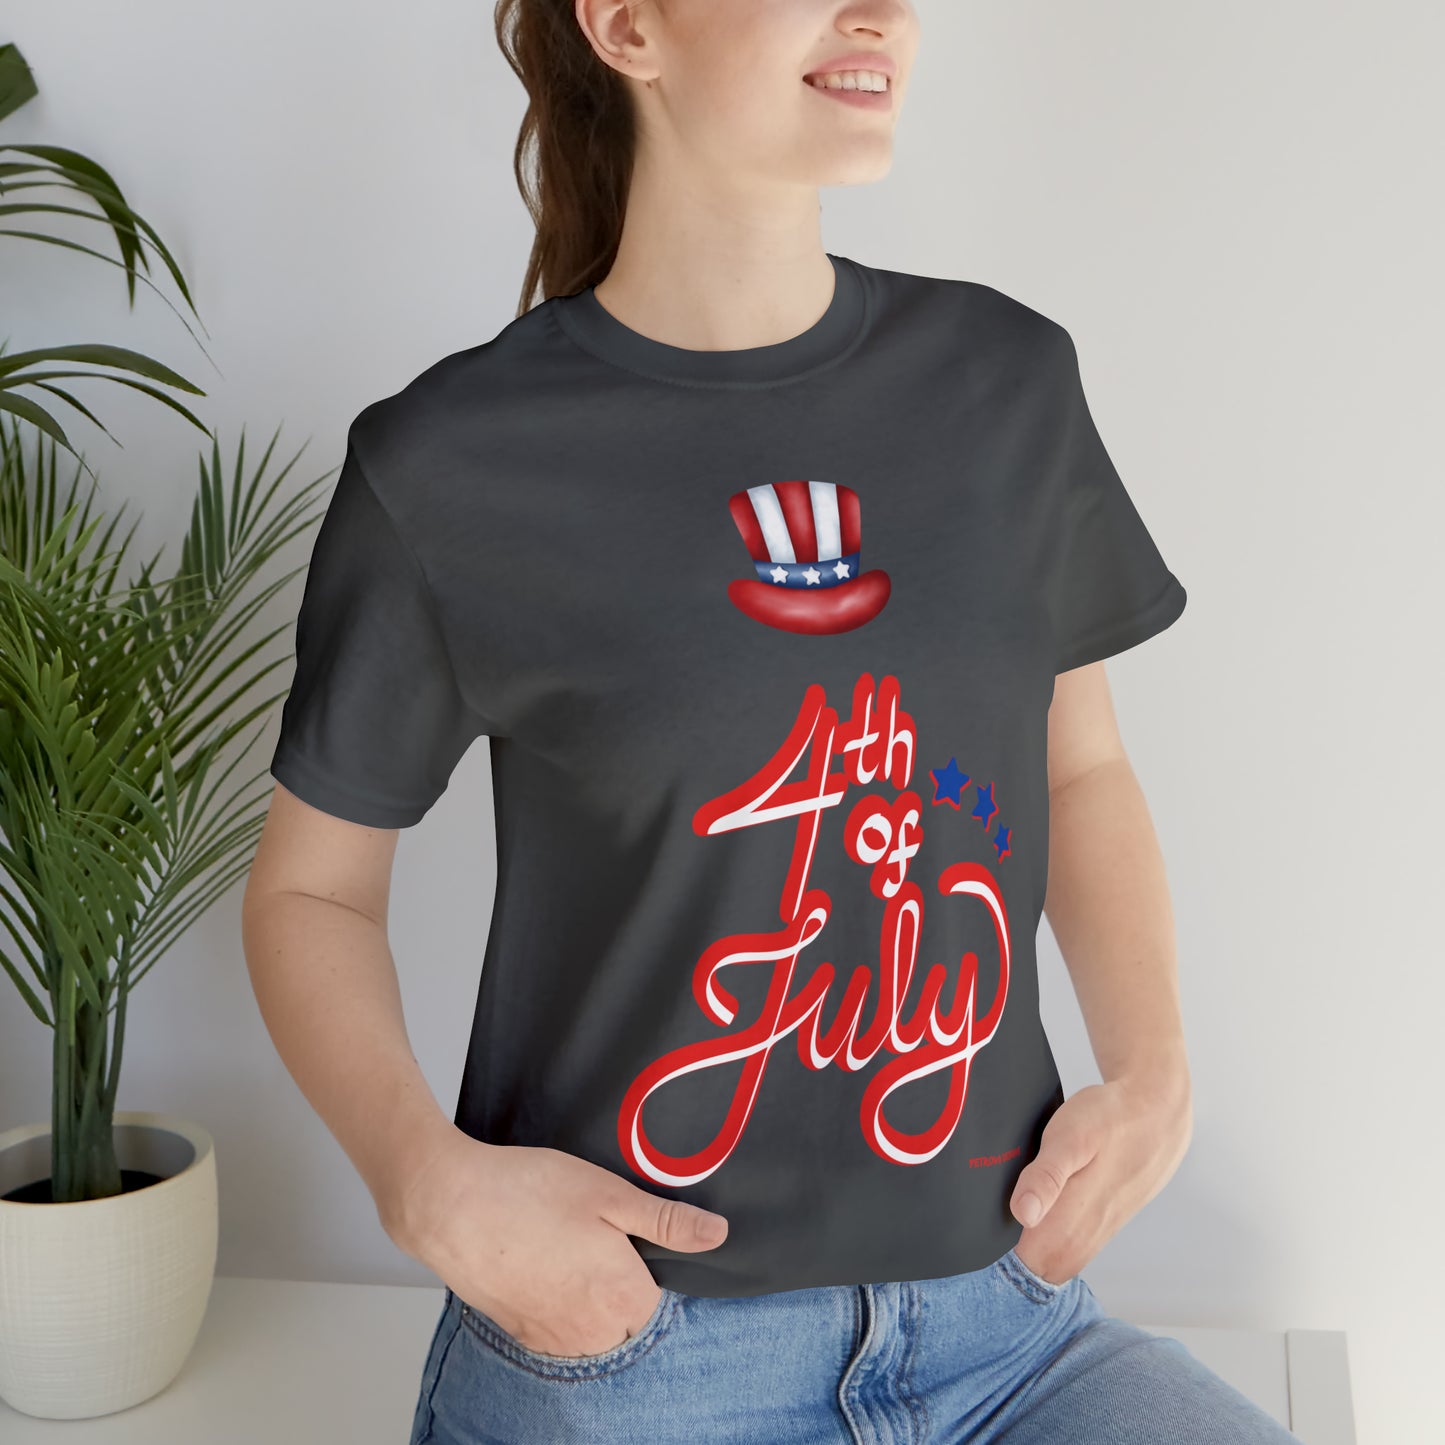 Asphalt T-Shirt Tshirt Design Gift for Friend and Family Short Sleeved Shirt 4th of July Independence Day Petrova Designs